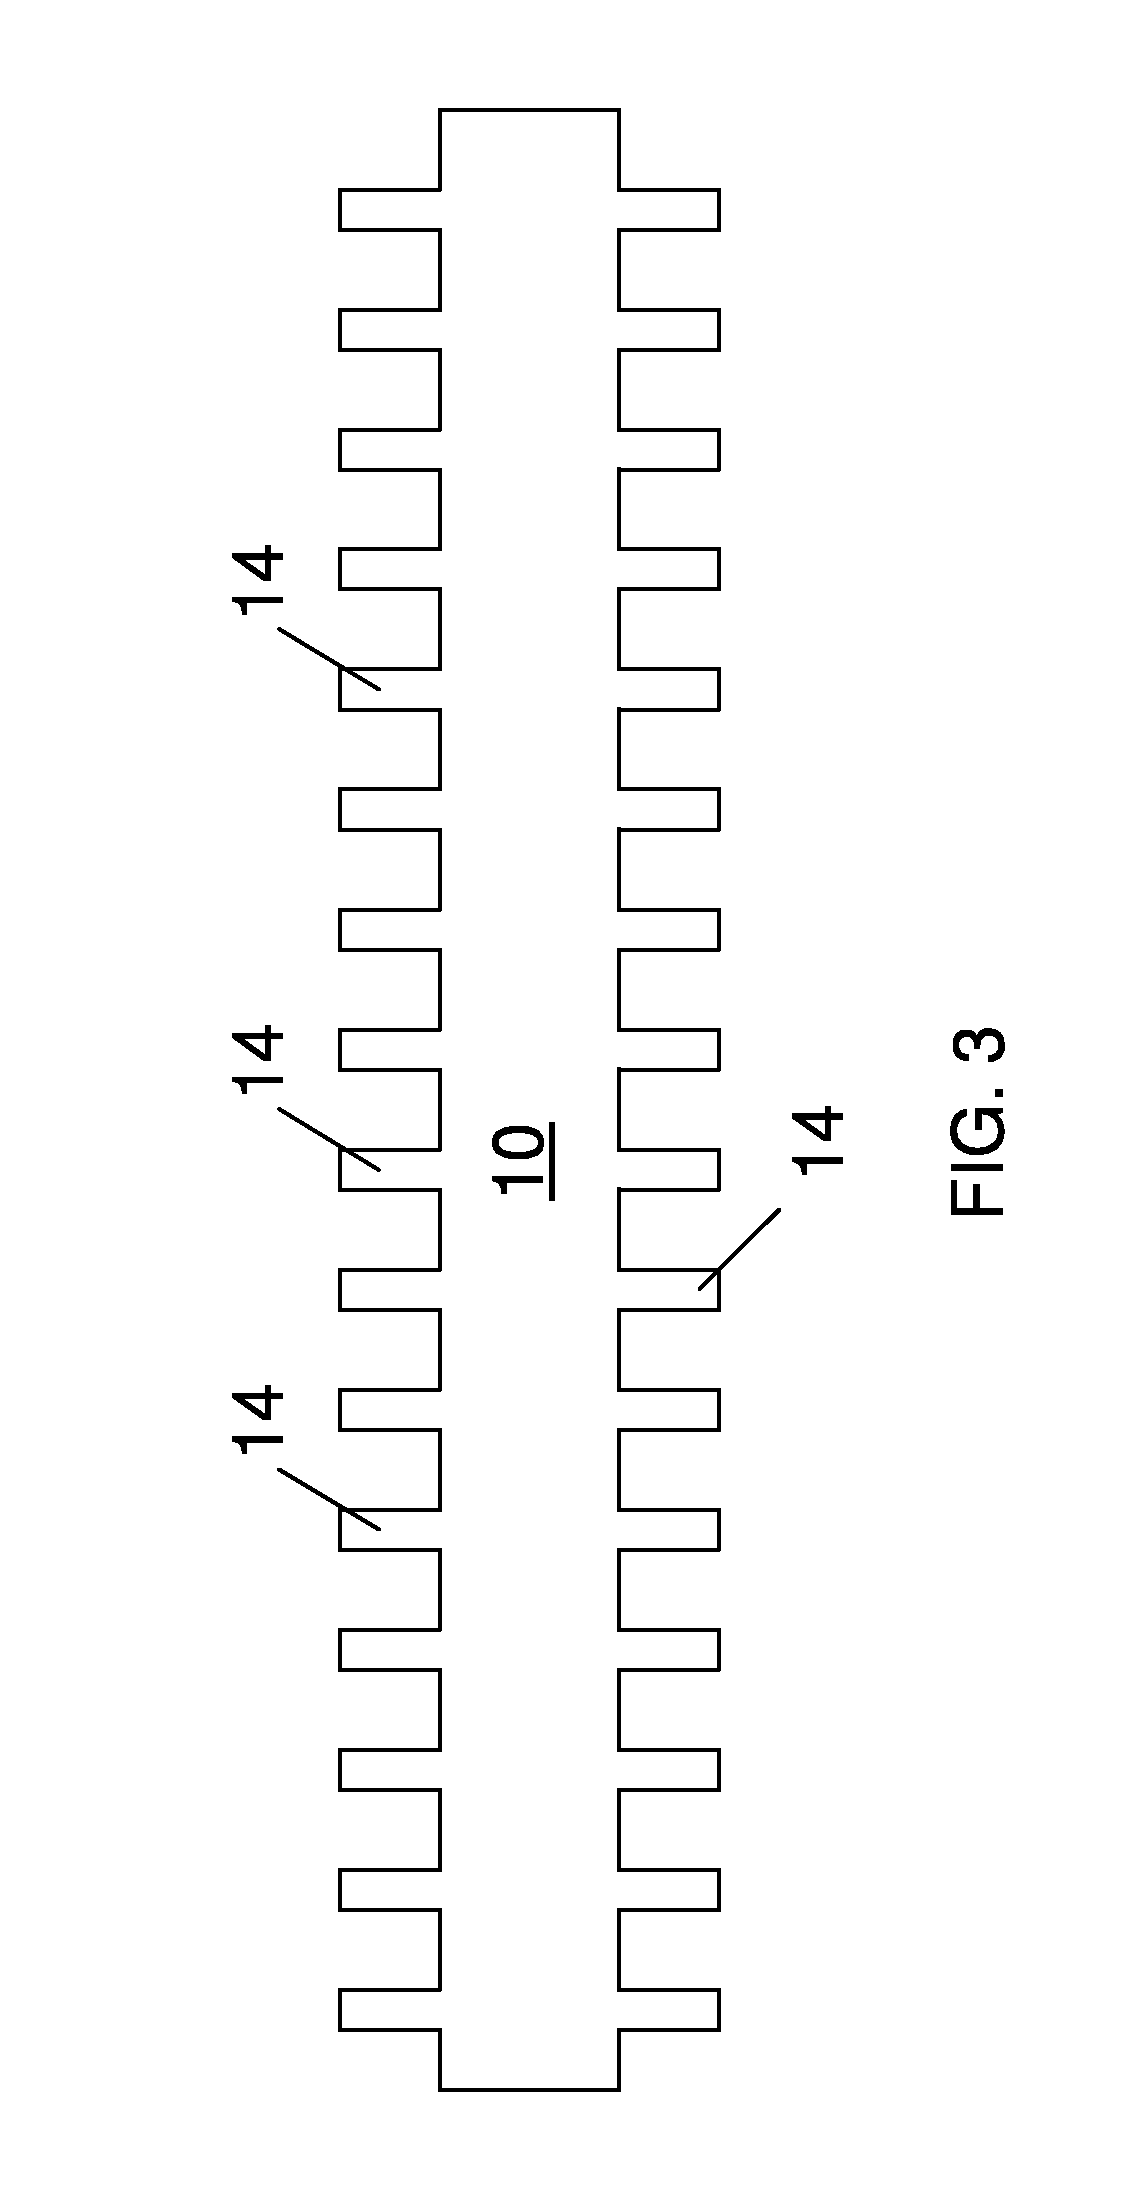 Process for Producing Shaped Metal Bodies Having a Structured Surface